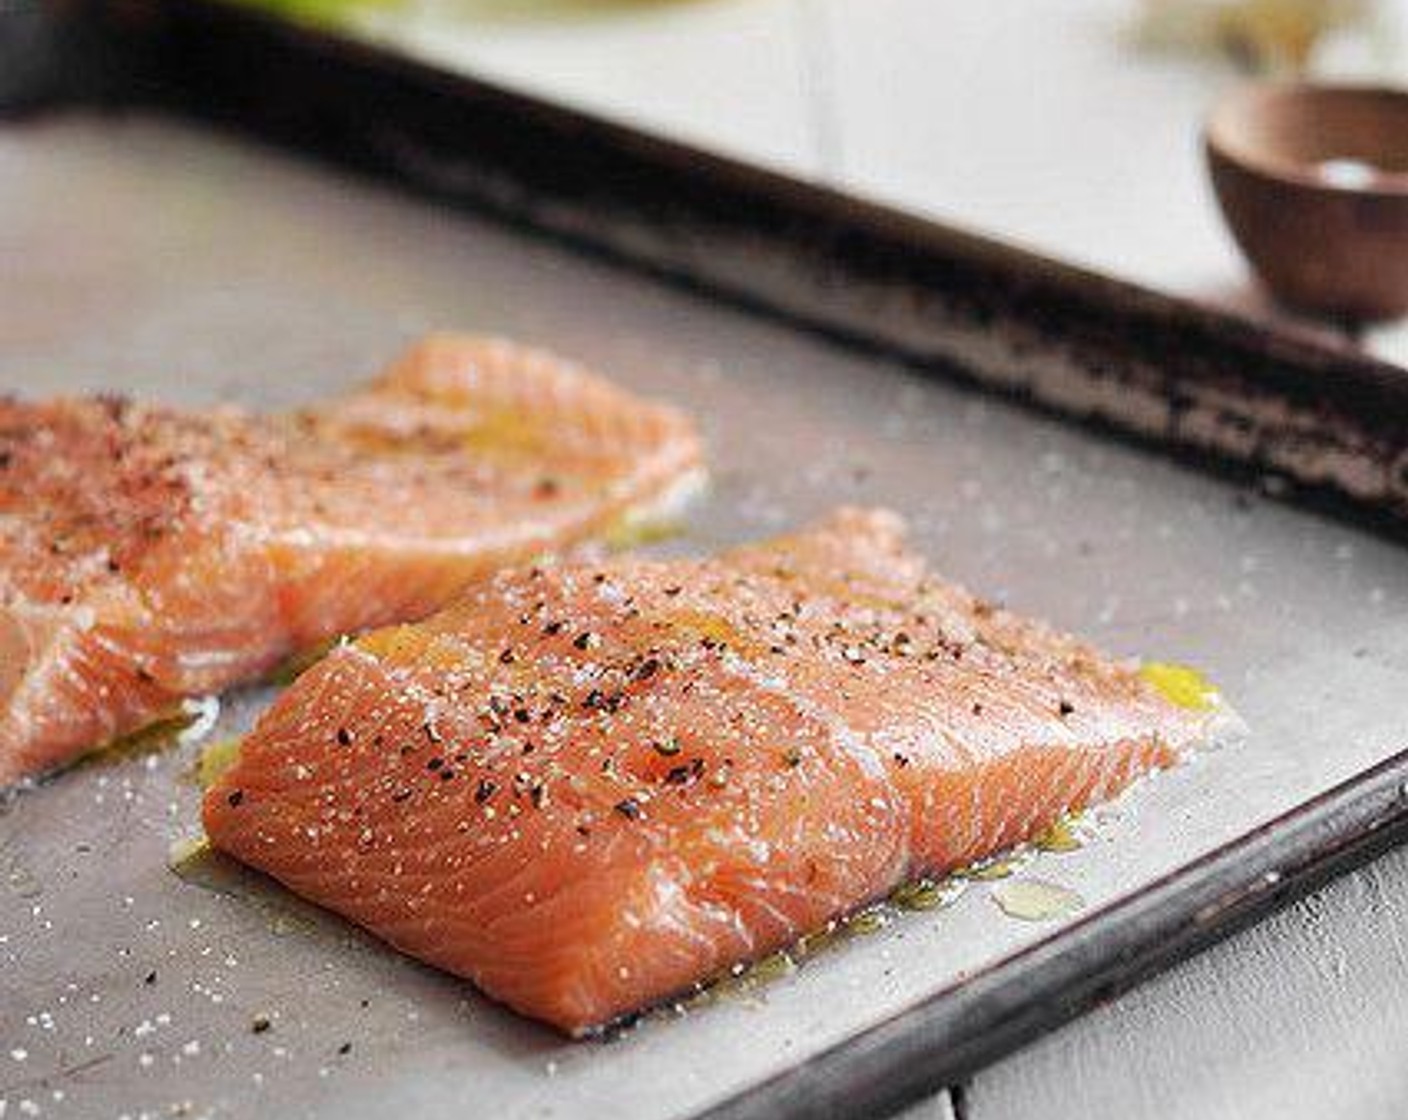 step 2 Place the Salmon (1 lb) skin side down onto a baking sheet. Drizzle each with Olive Oil (as needed), about a teaspoon on each. Season with Salt (1 tsp) and Freshly Ground Black Pepper (1 tsp)